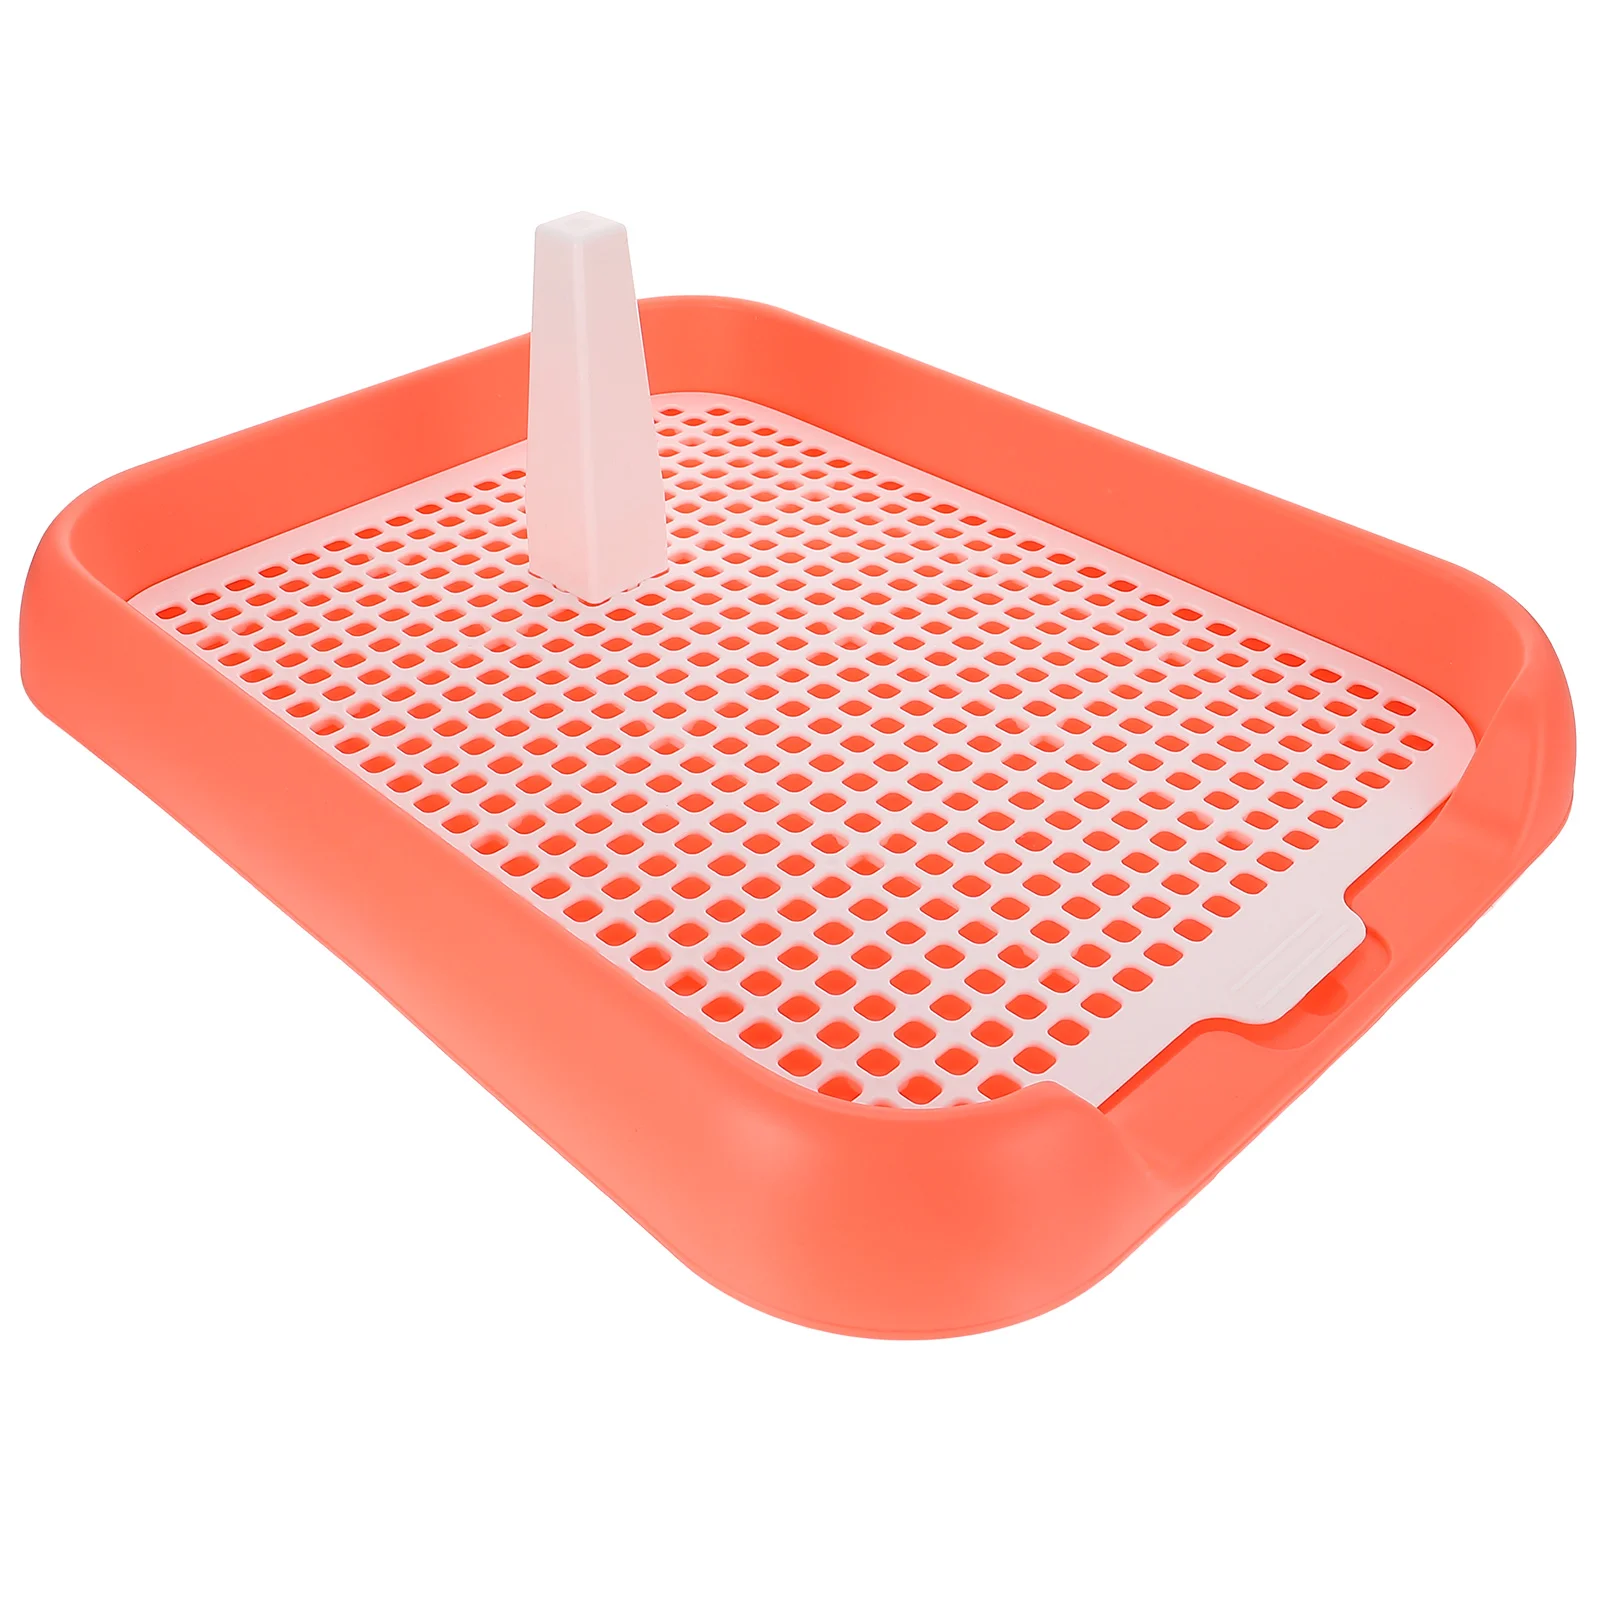 

Pet Toilet Puppy Indoor Train Supply Plastic Tray Puppies Anti-slip Dog Potty Silica for Small Dogs Cats Litter Box Pet Supplies